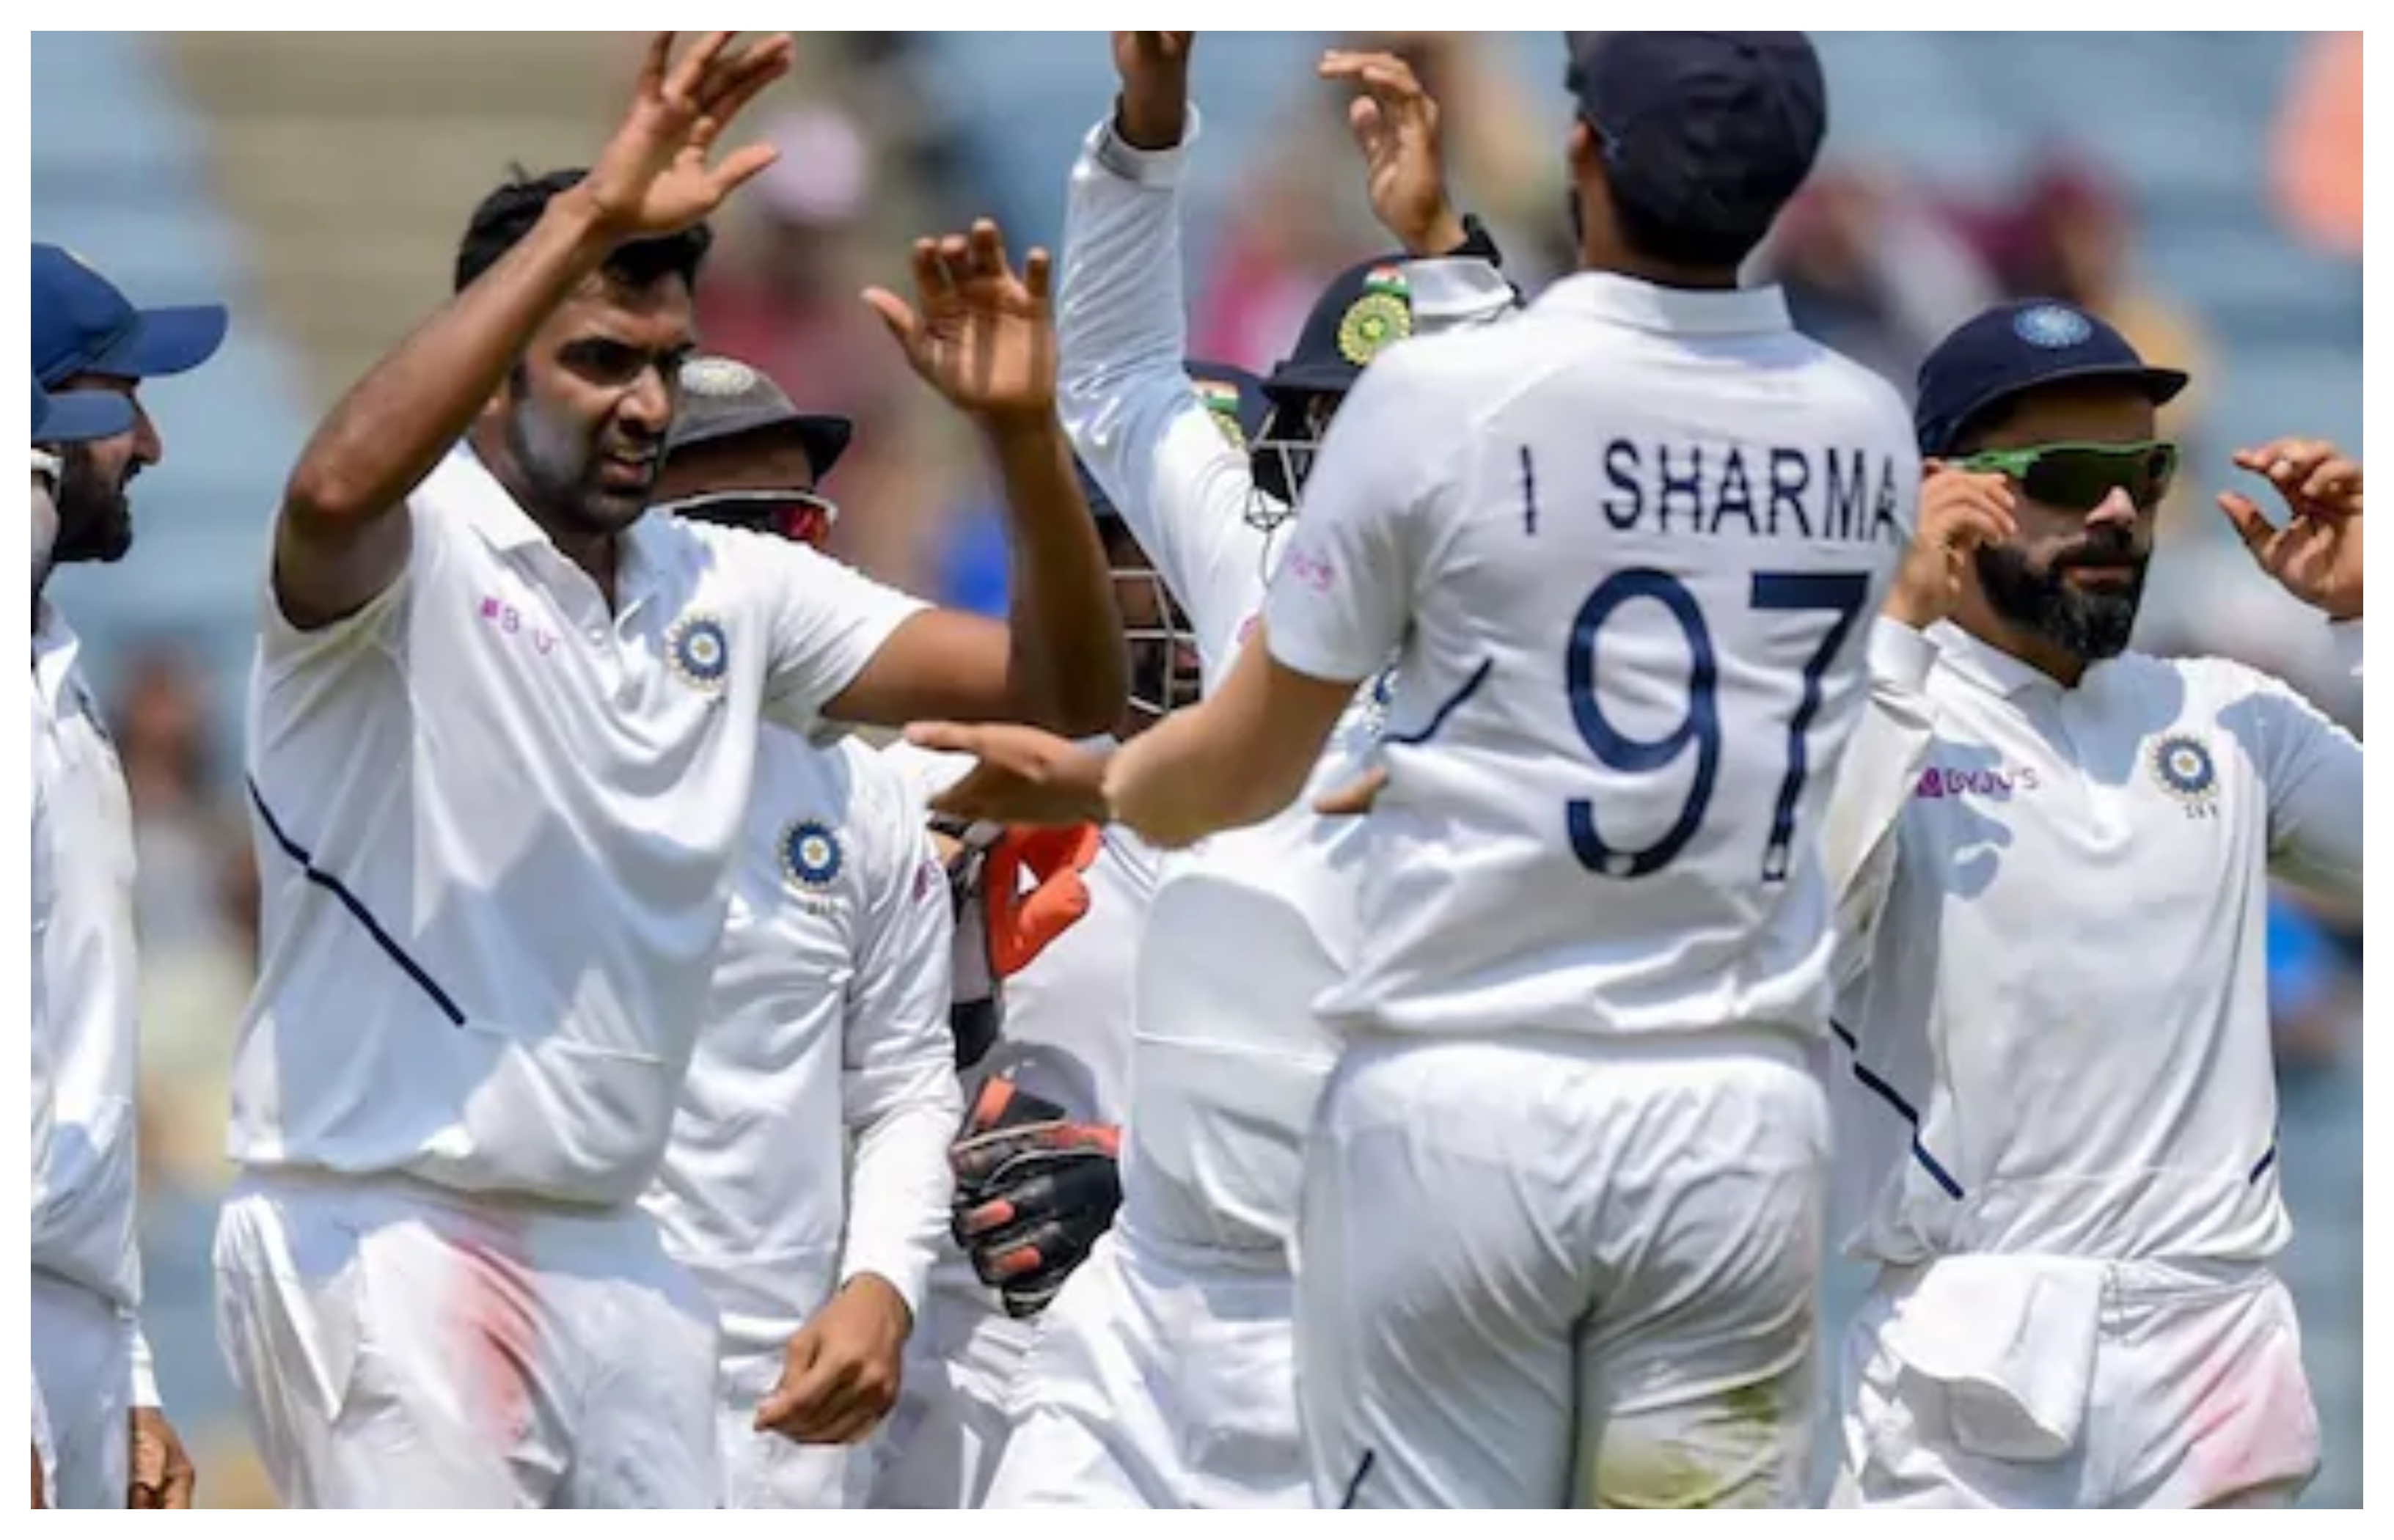 Team India had a dominating outing on Day 3 of the second Test against South Africa | AFP